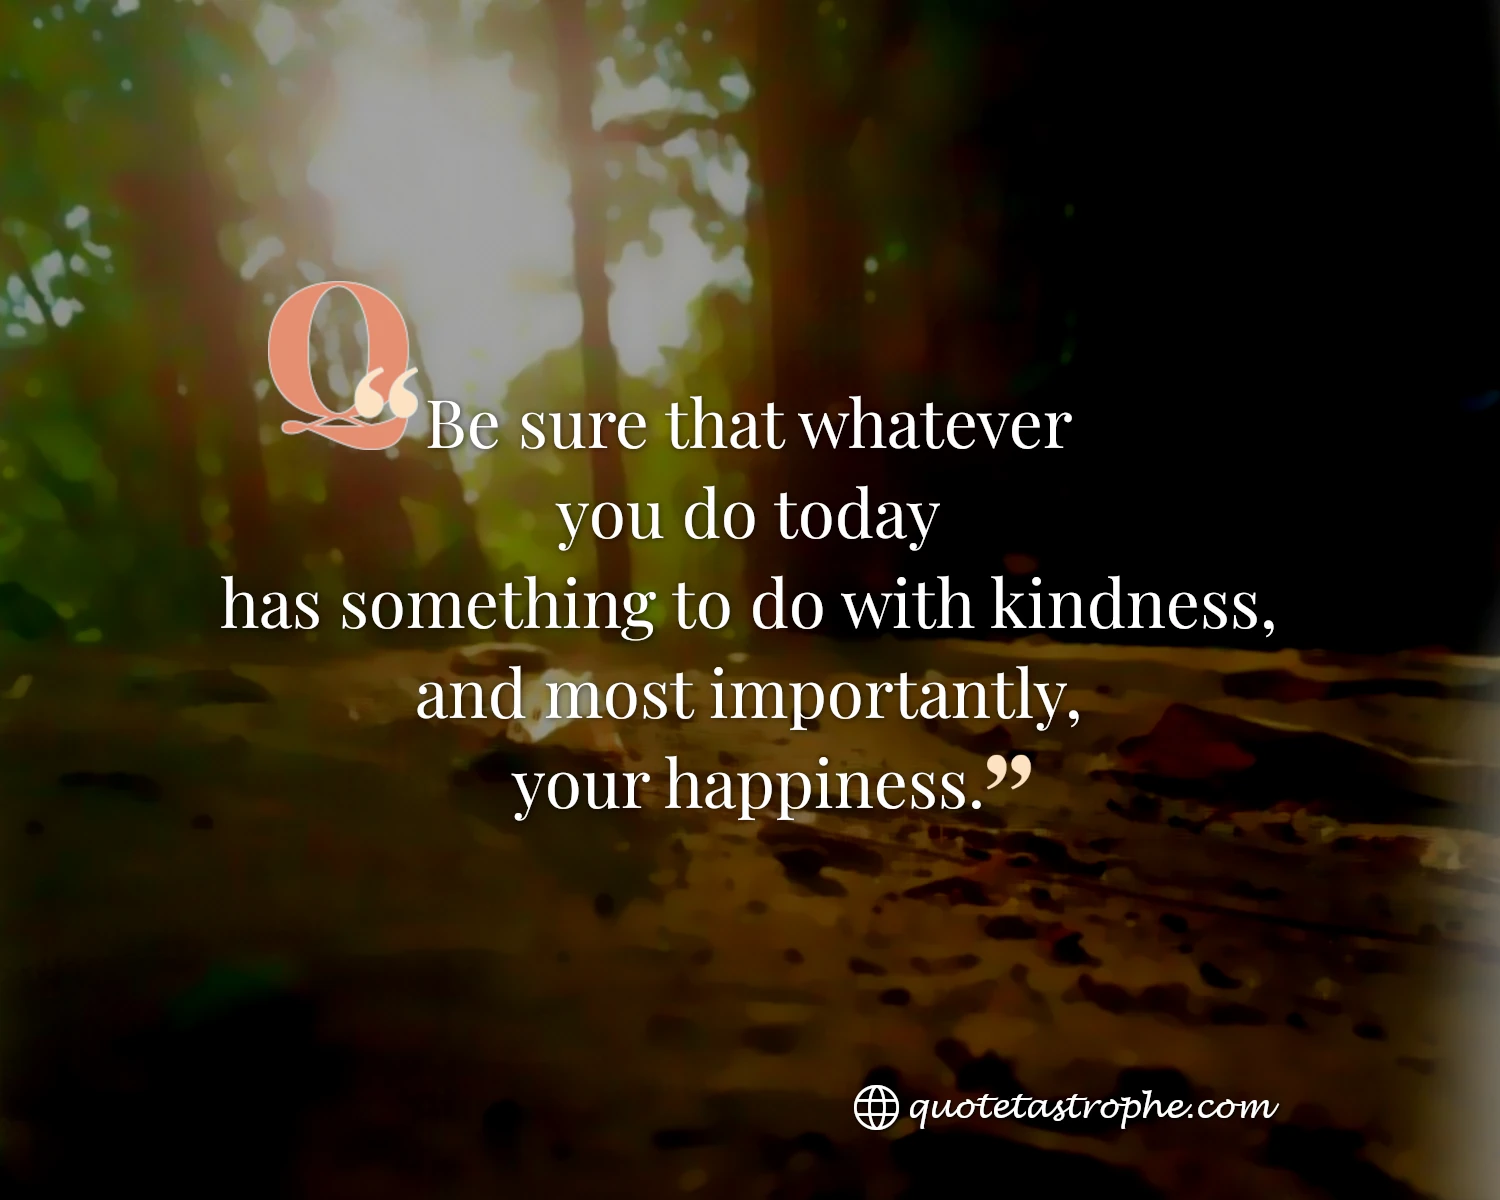 Be Sure That Whatever You Do is For Kindness & Happiness